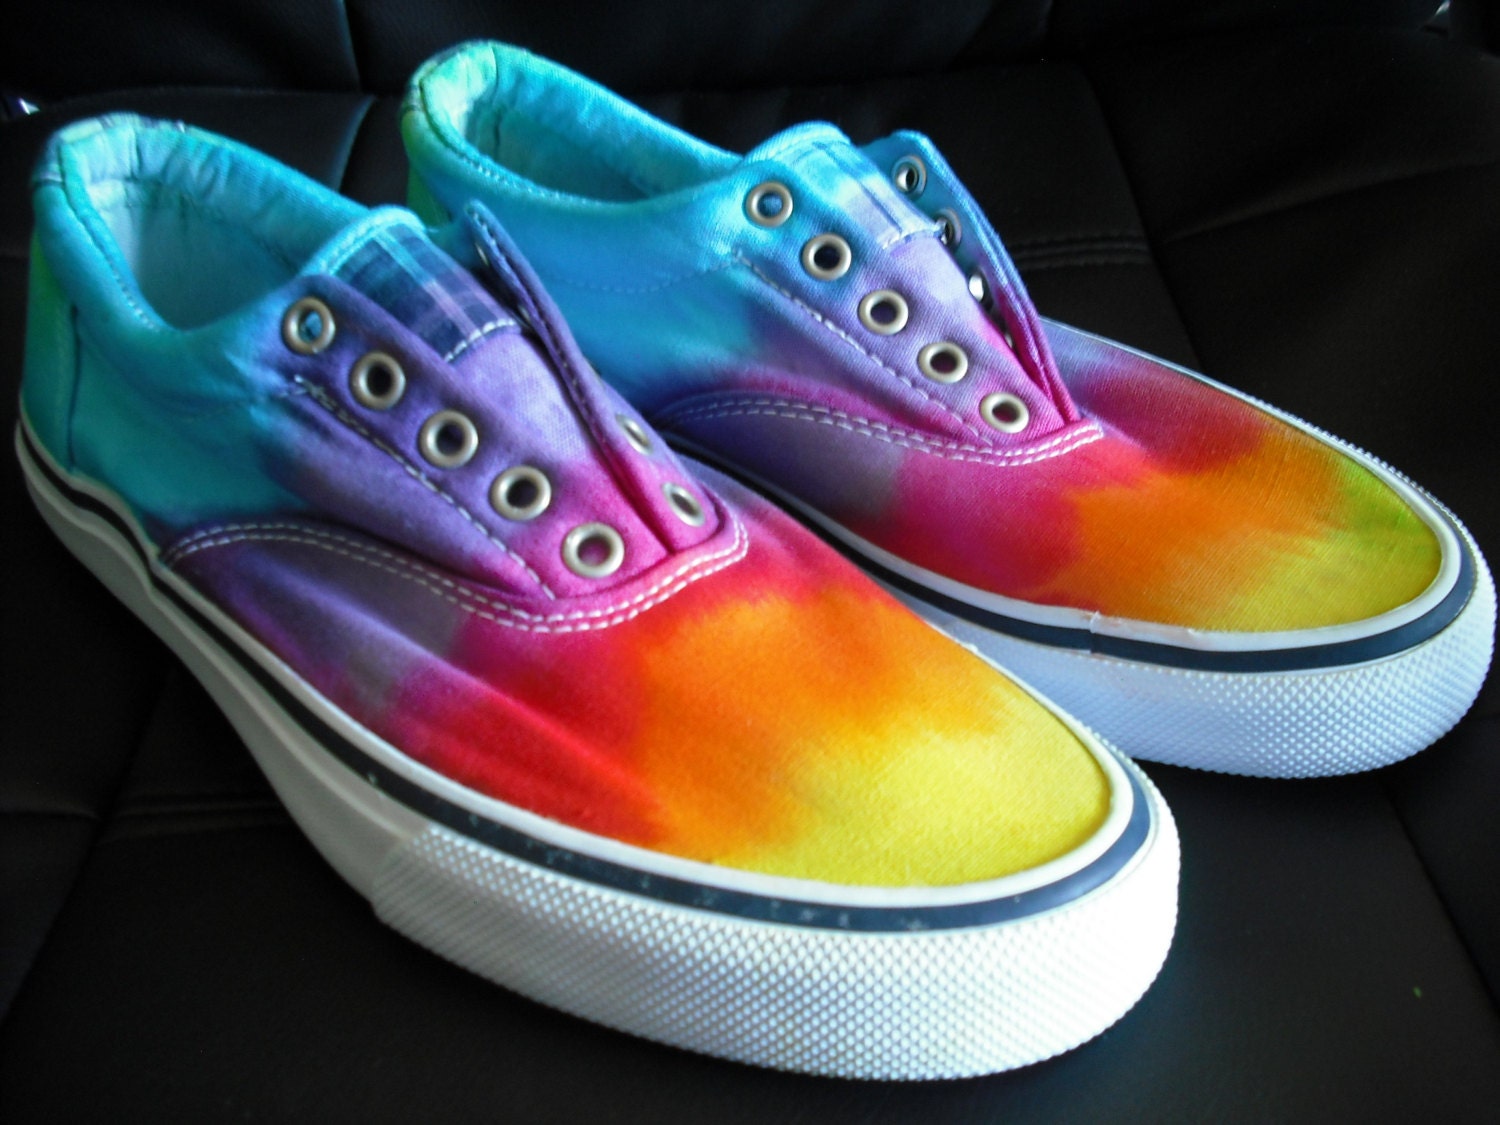 Tie dye slip on shoes by DoYouDreamOutLoud on Etsy